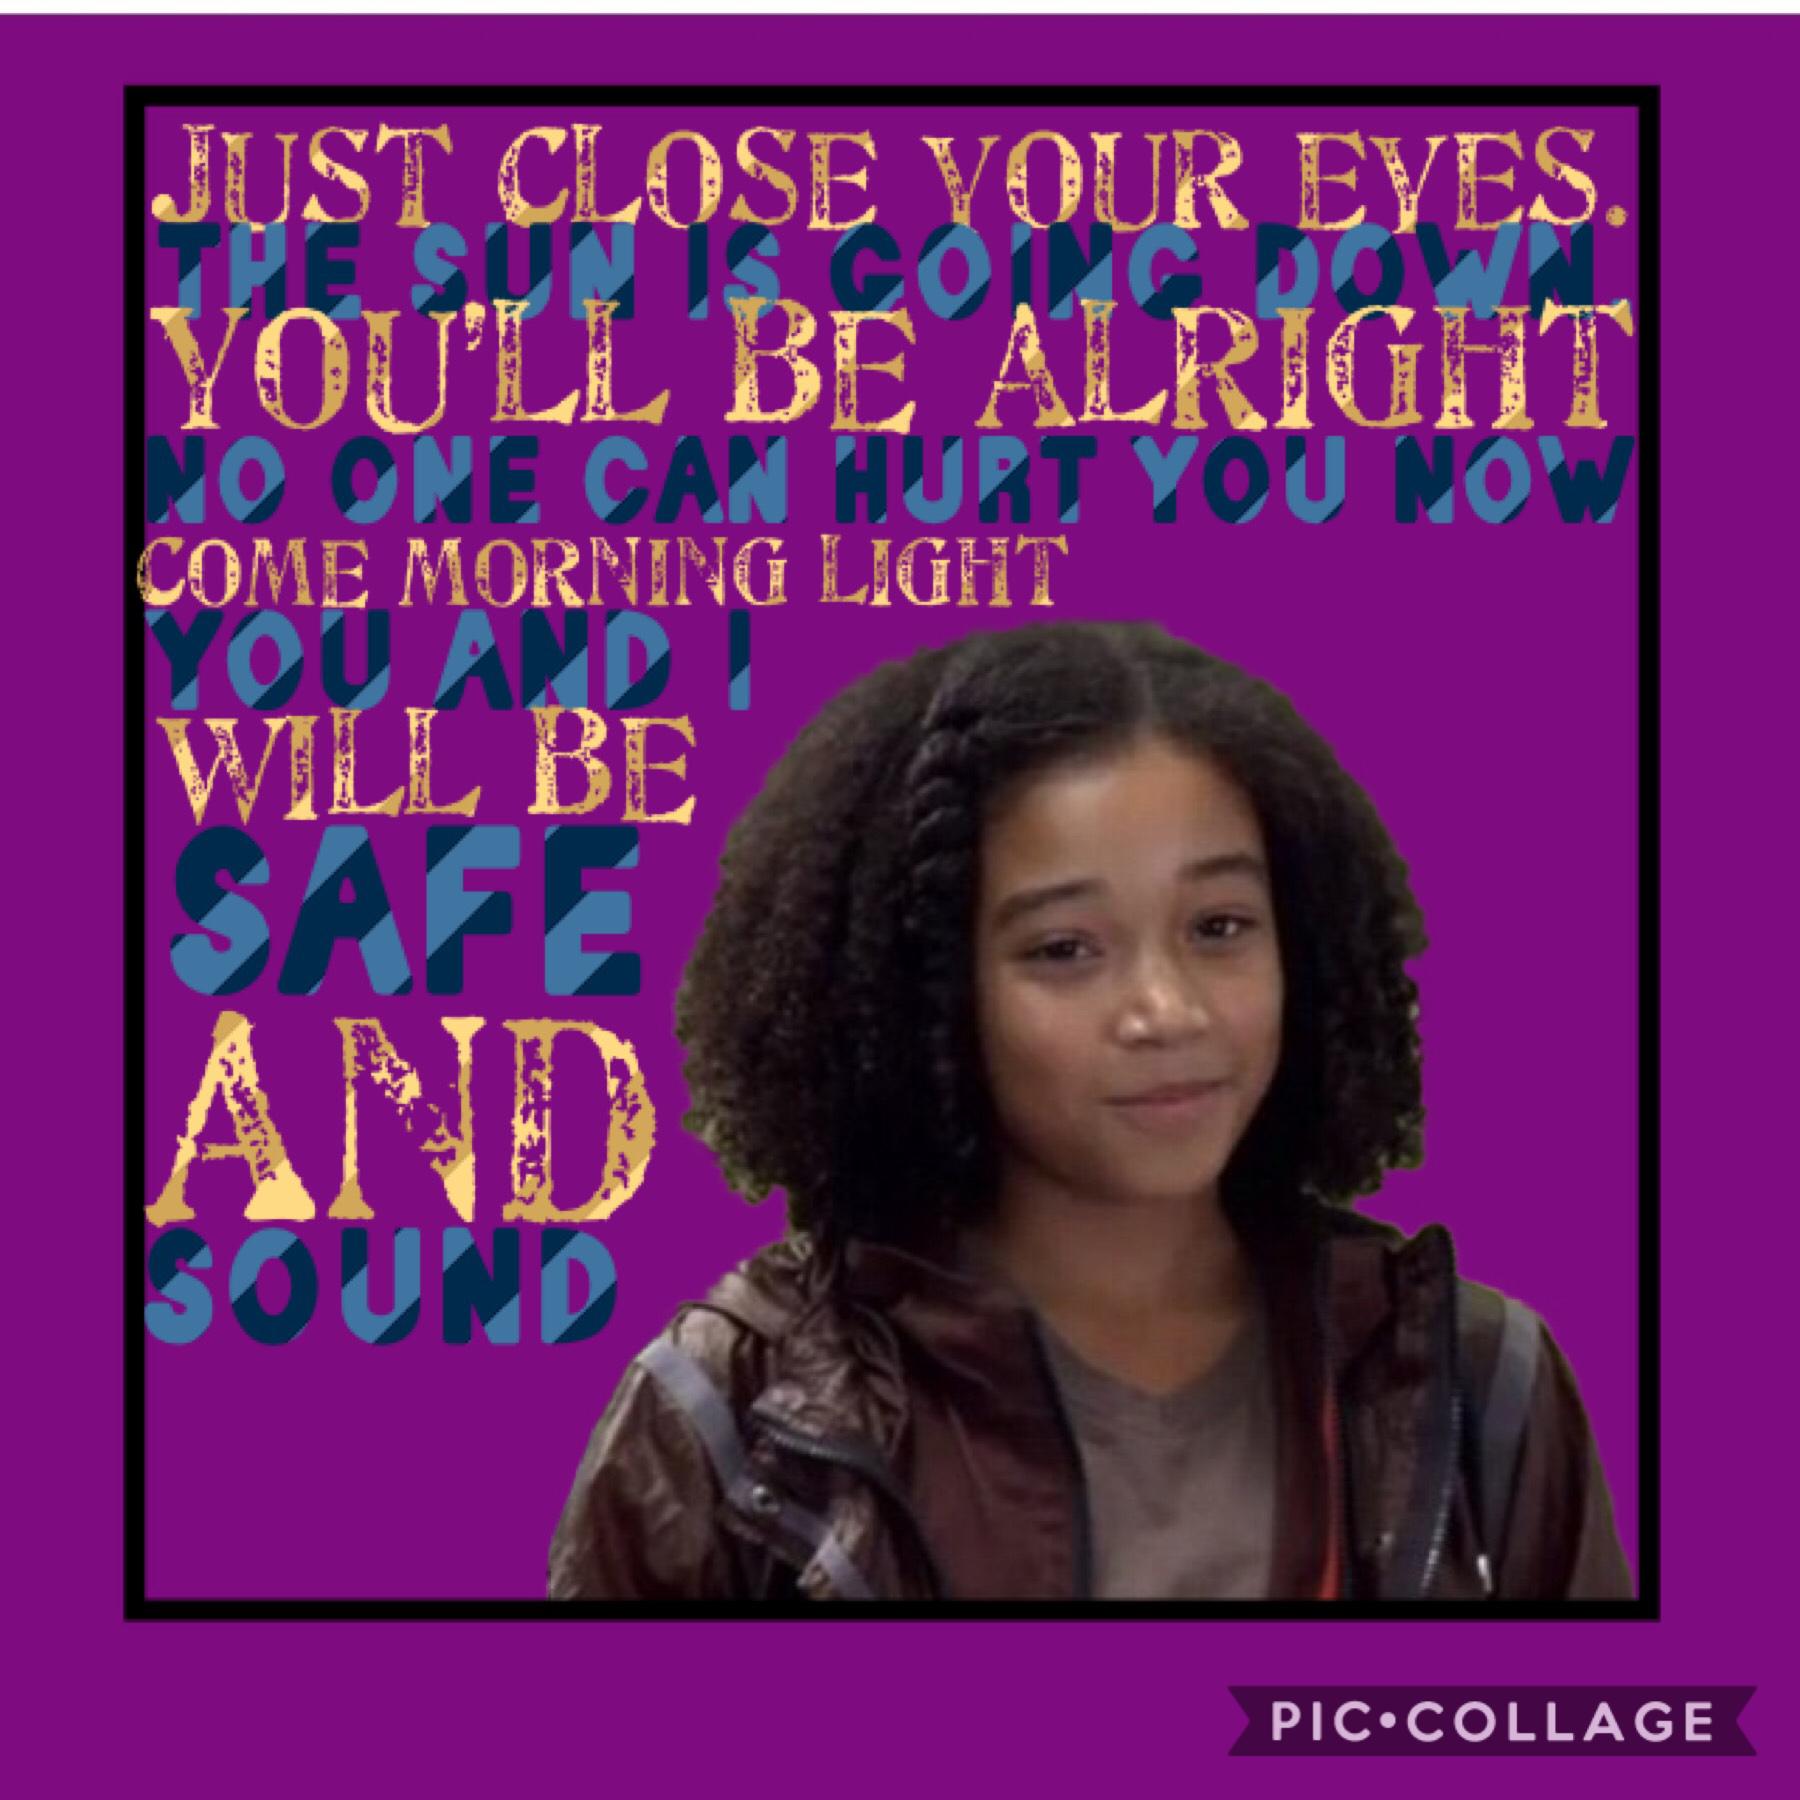 Rue from hunger games